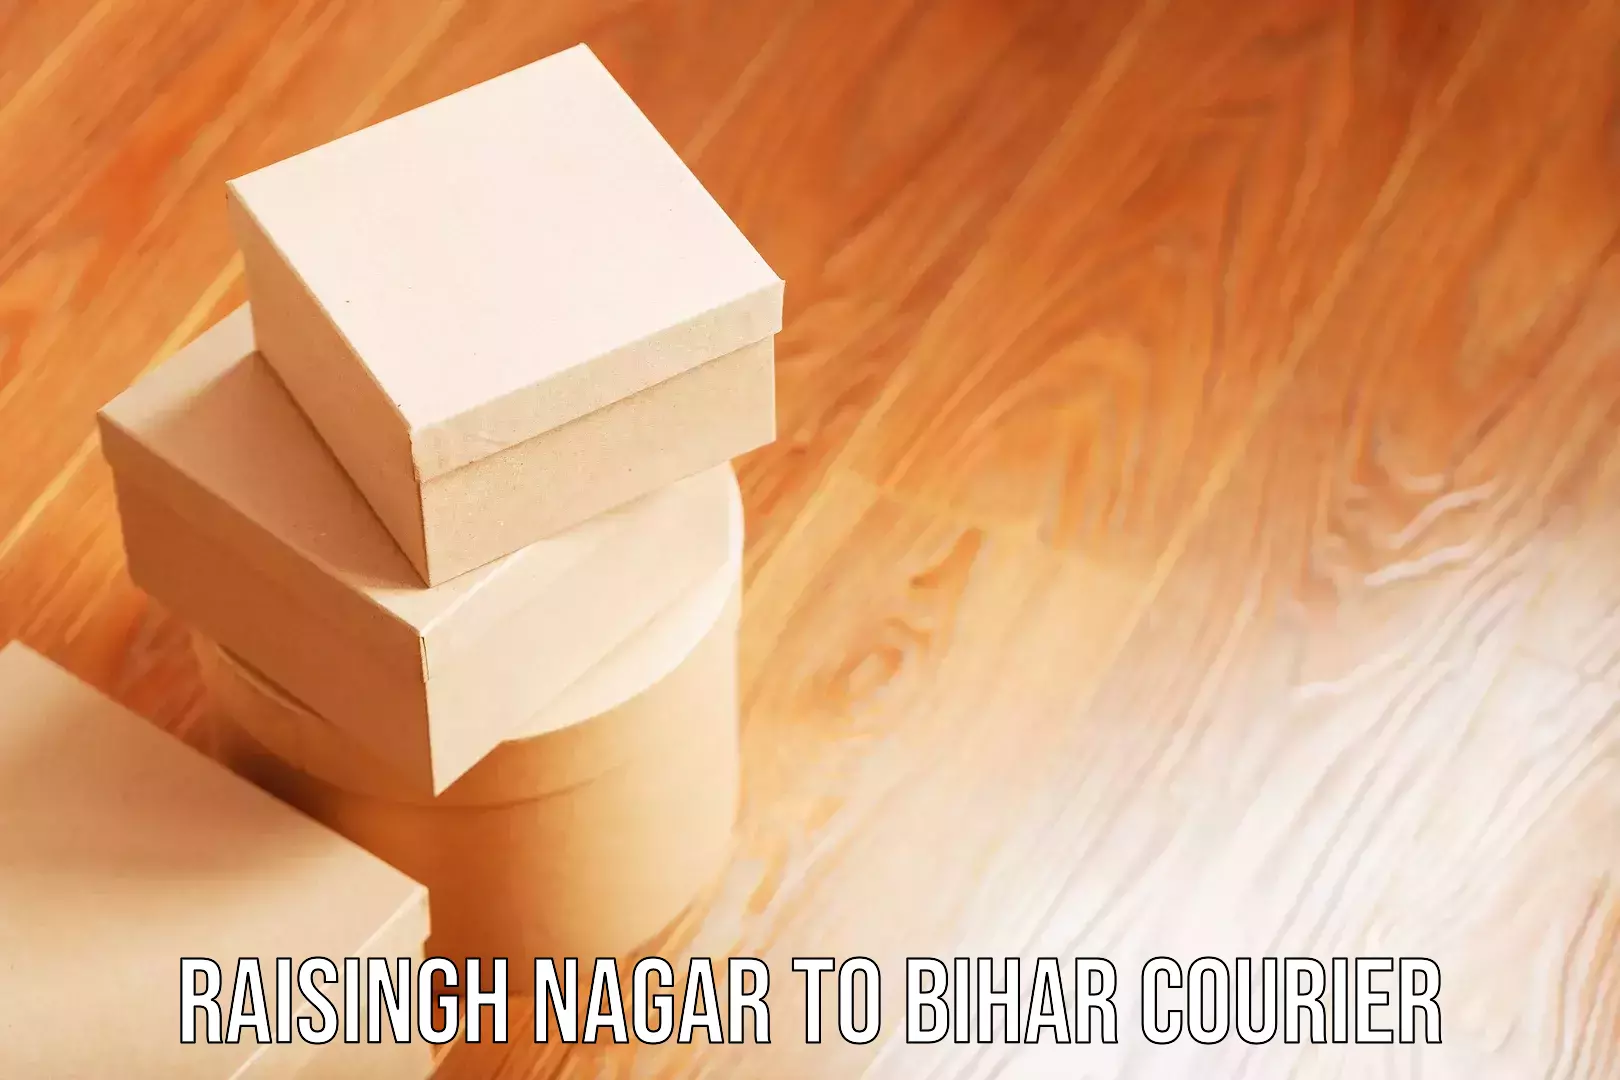 Luggage storage and delivery in Raisingh Nagar to Bihar